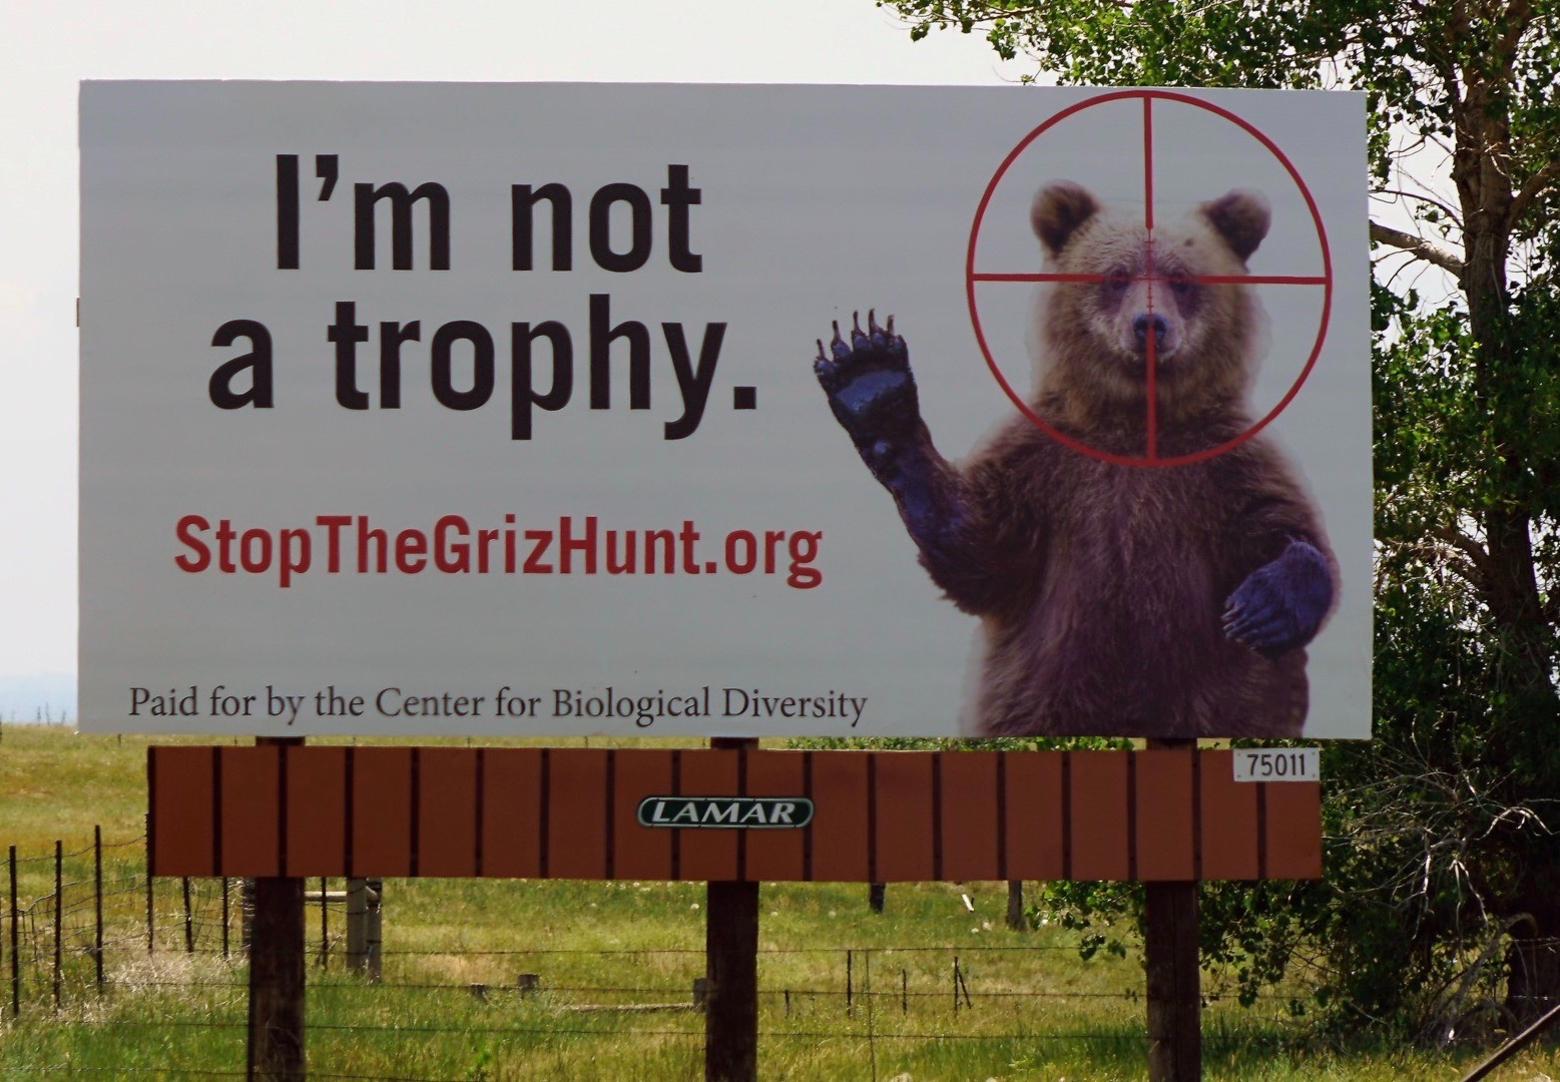 A billboard that appeared along the Front Range of the Colorado Rockies